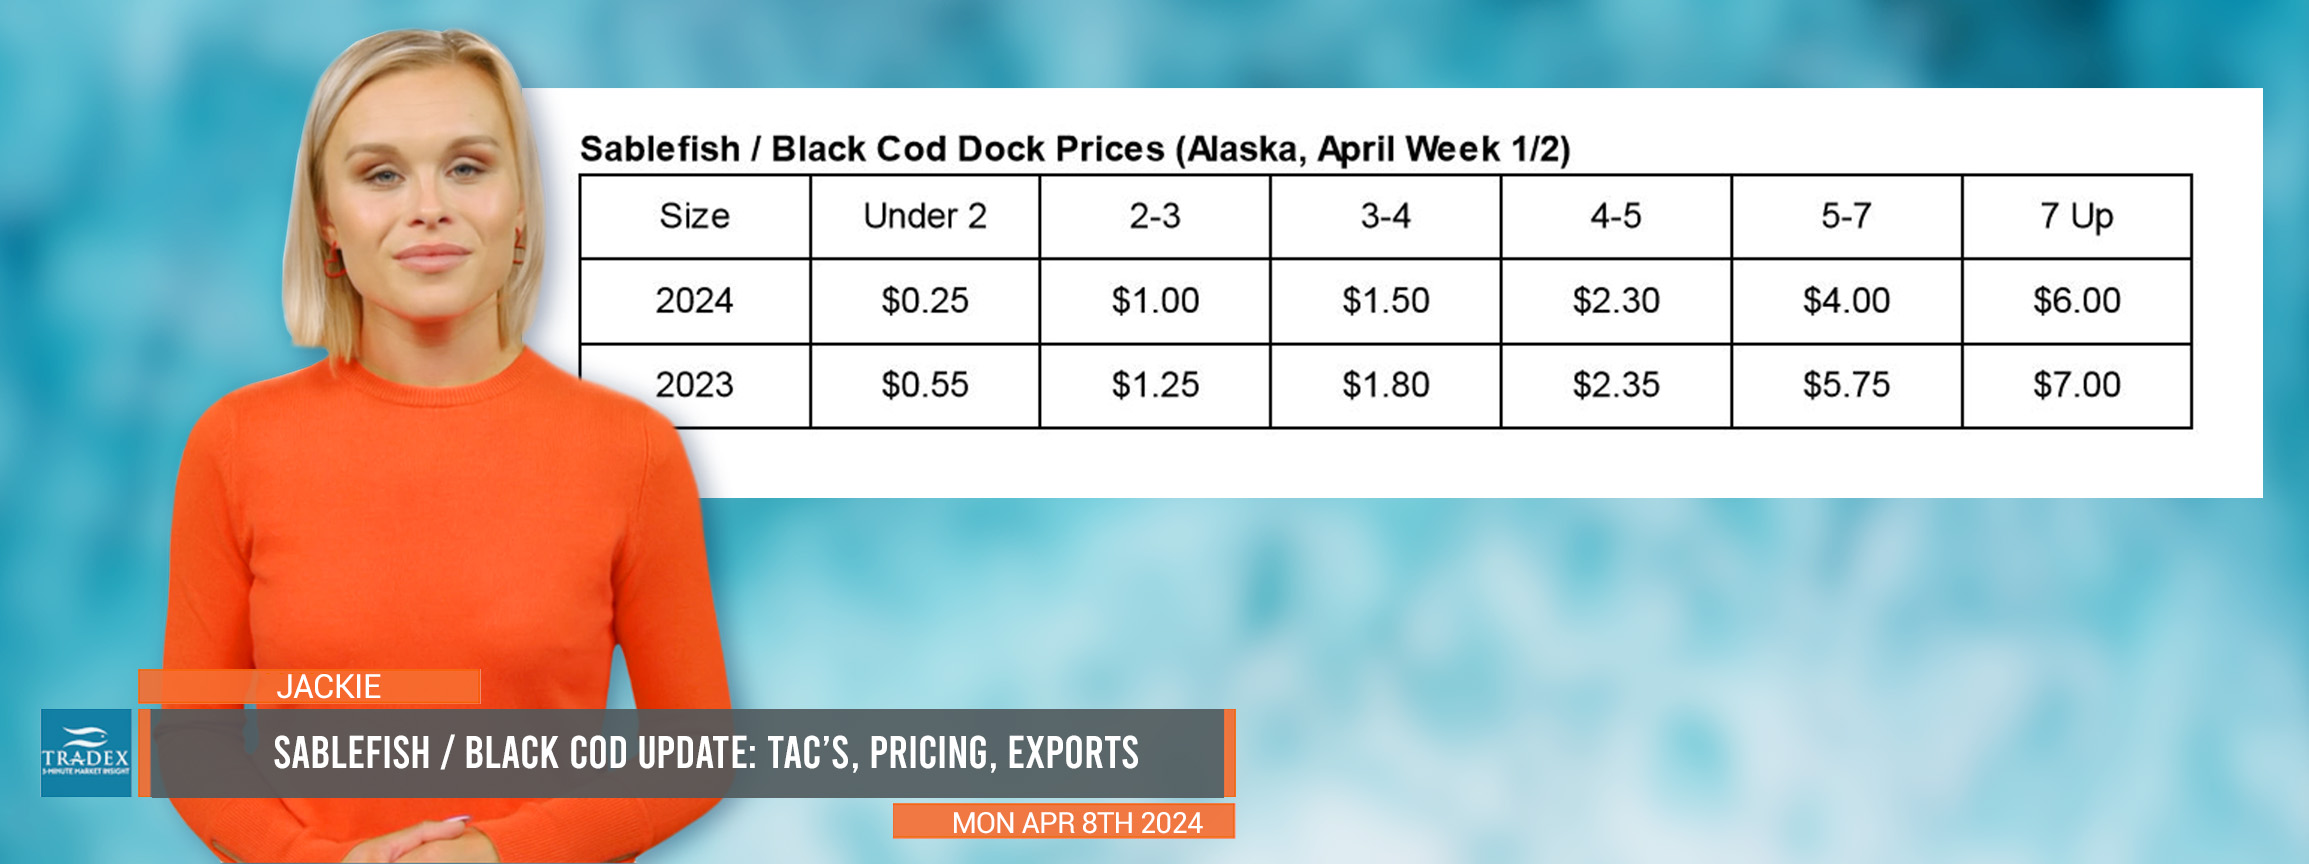 Sablefish (Black Cod) Update: TAC’s, Slower Start Lower Prices, Exports to Japan